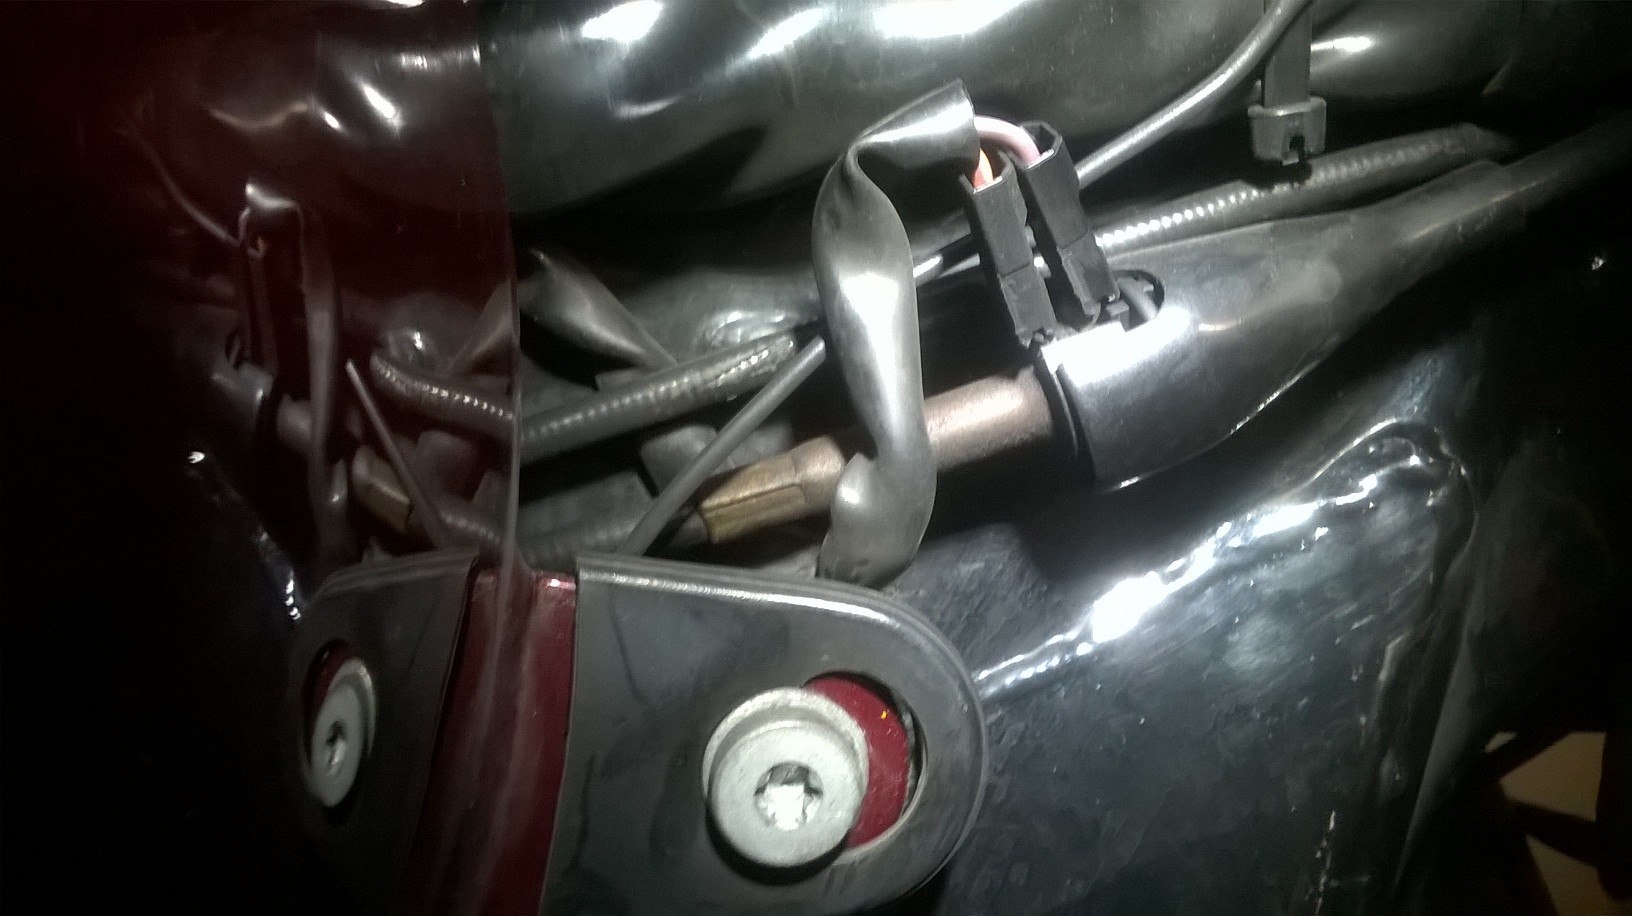 wires on throttle cable - Harley Davidson Forums